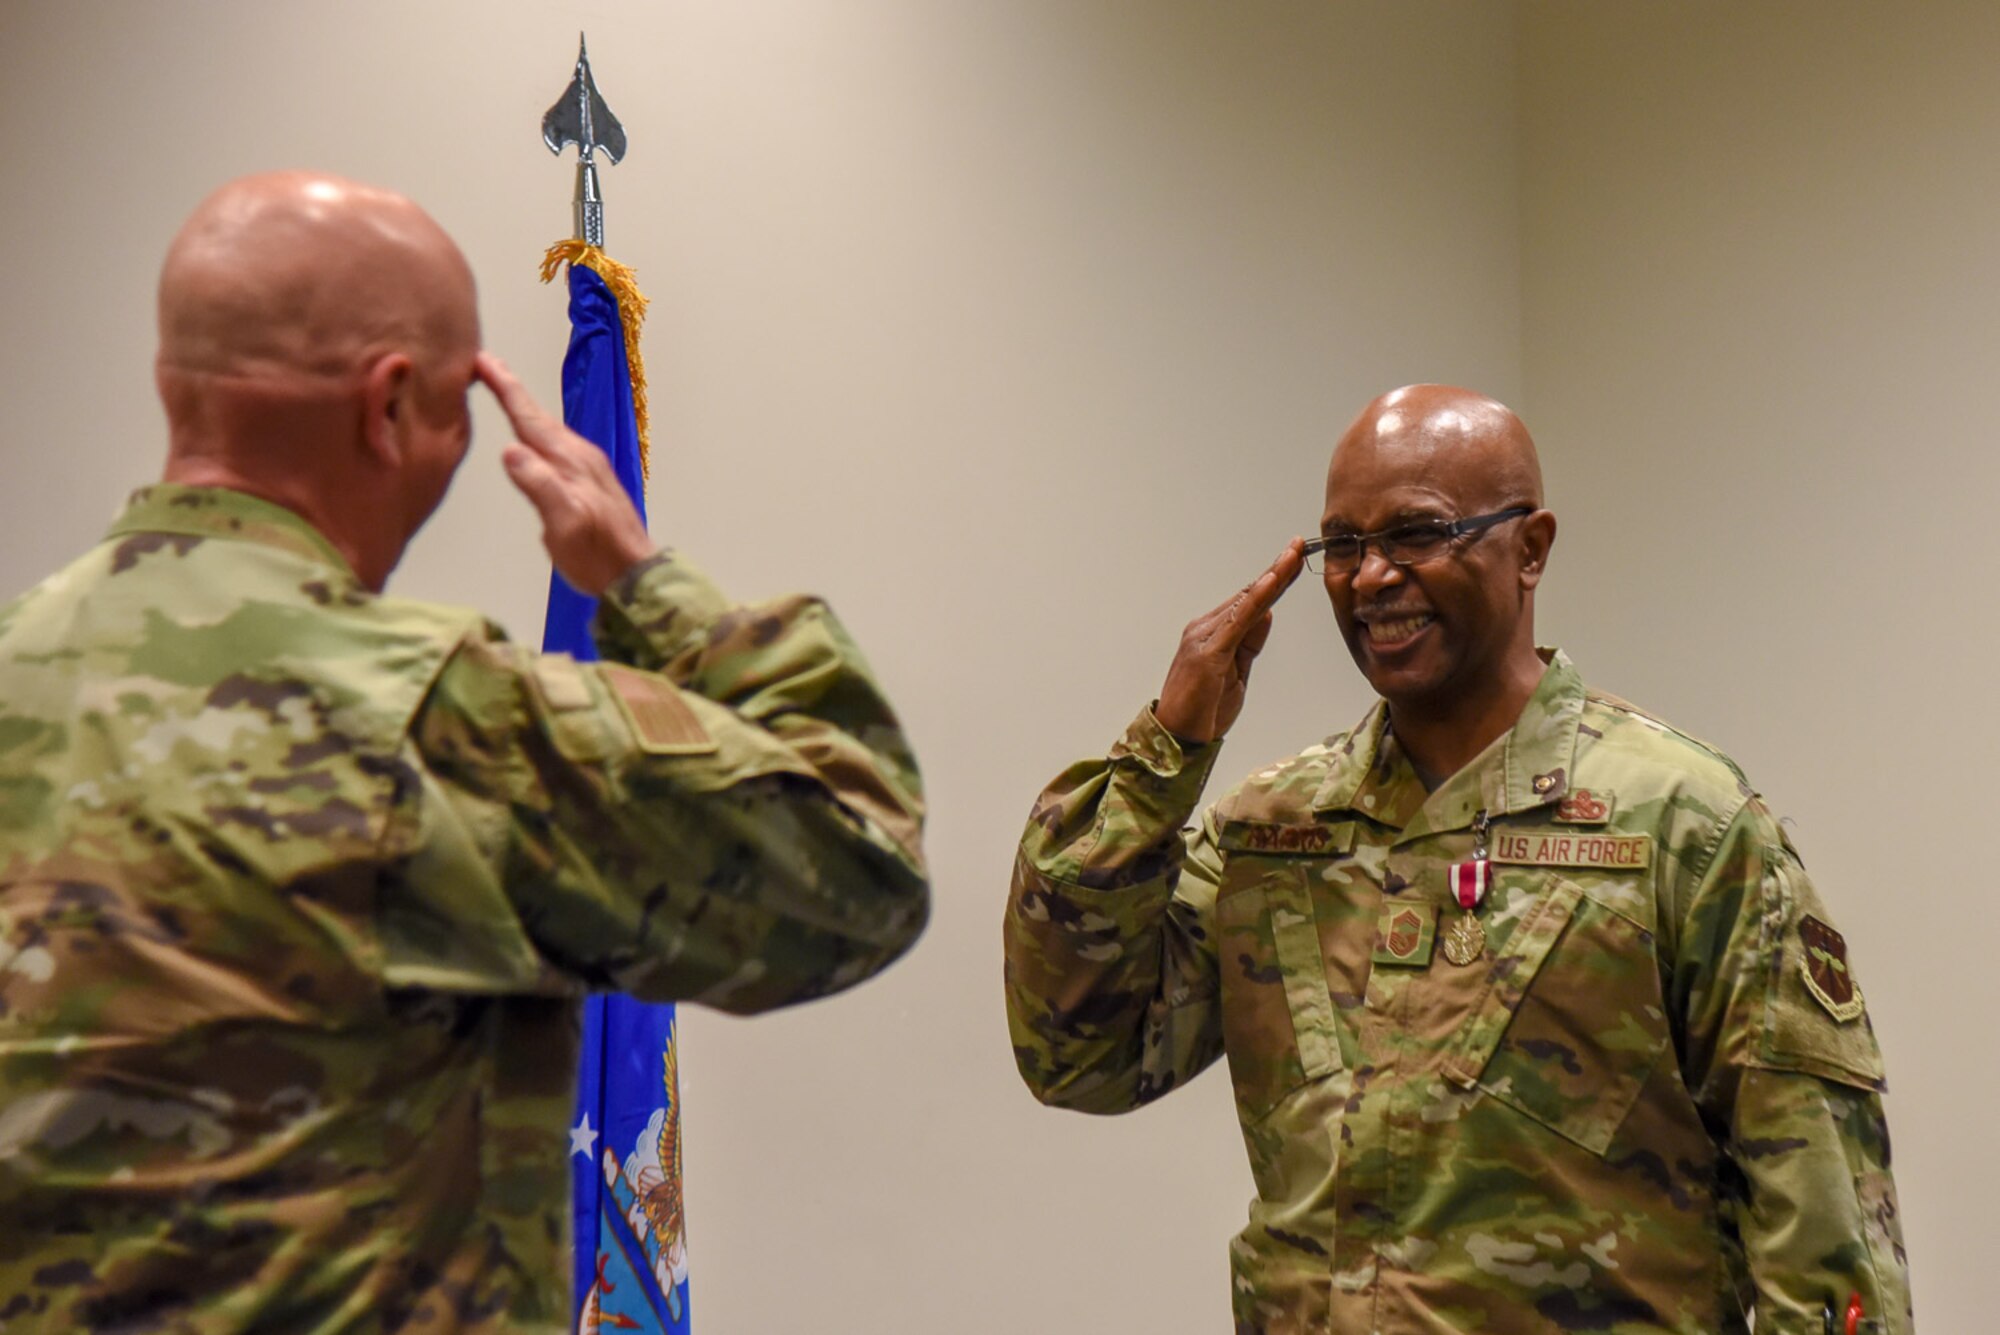 Chief Master Sgt. Marshall O. Harris Jr., 403rd Maintenance Group quality assurance superintendent at Keesler Air Force Base, Miss., salutes Col. Jay Johnson, 403rd MSG commander, after receiving a coin during his retirement ceremony at Roberts Maintenance Facility April 6, 2019. (U.S. Air Force photo by Senior Airman Kristen Pittman)